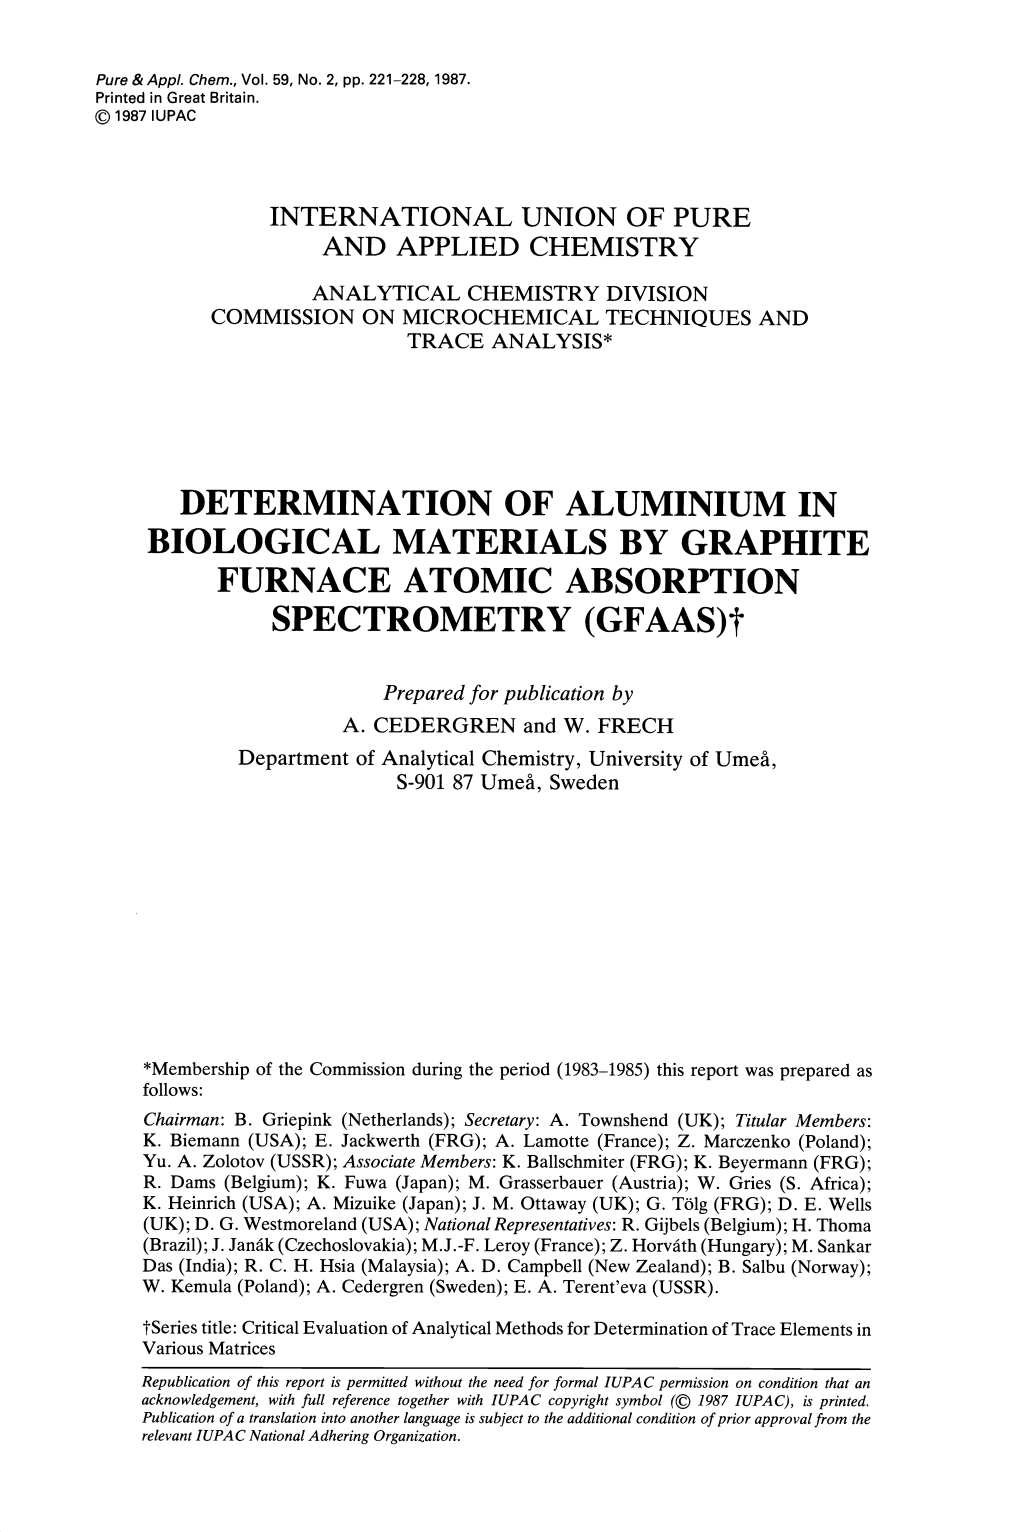 DETERMINATION of ALUMINIUM in BIOLOGICAL MATERIALS by GRAPHITE FURNACE ATOMIC ABSORPTION SPECTROMETRY (GFAAS)T